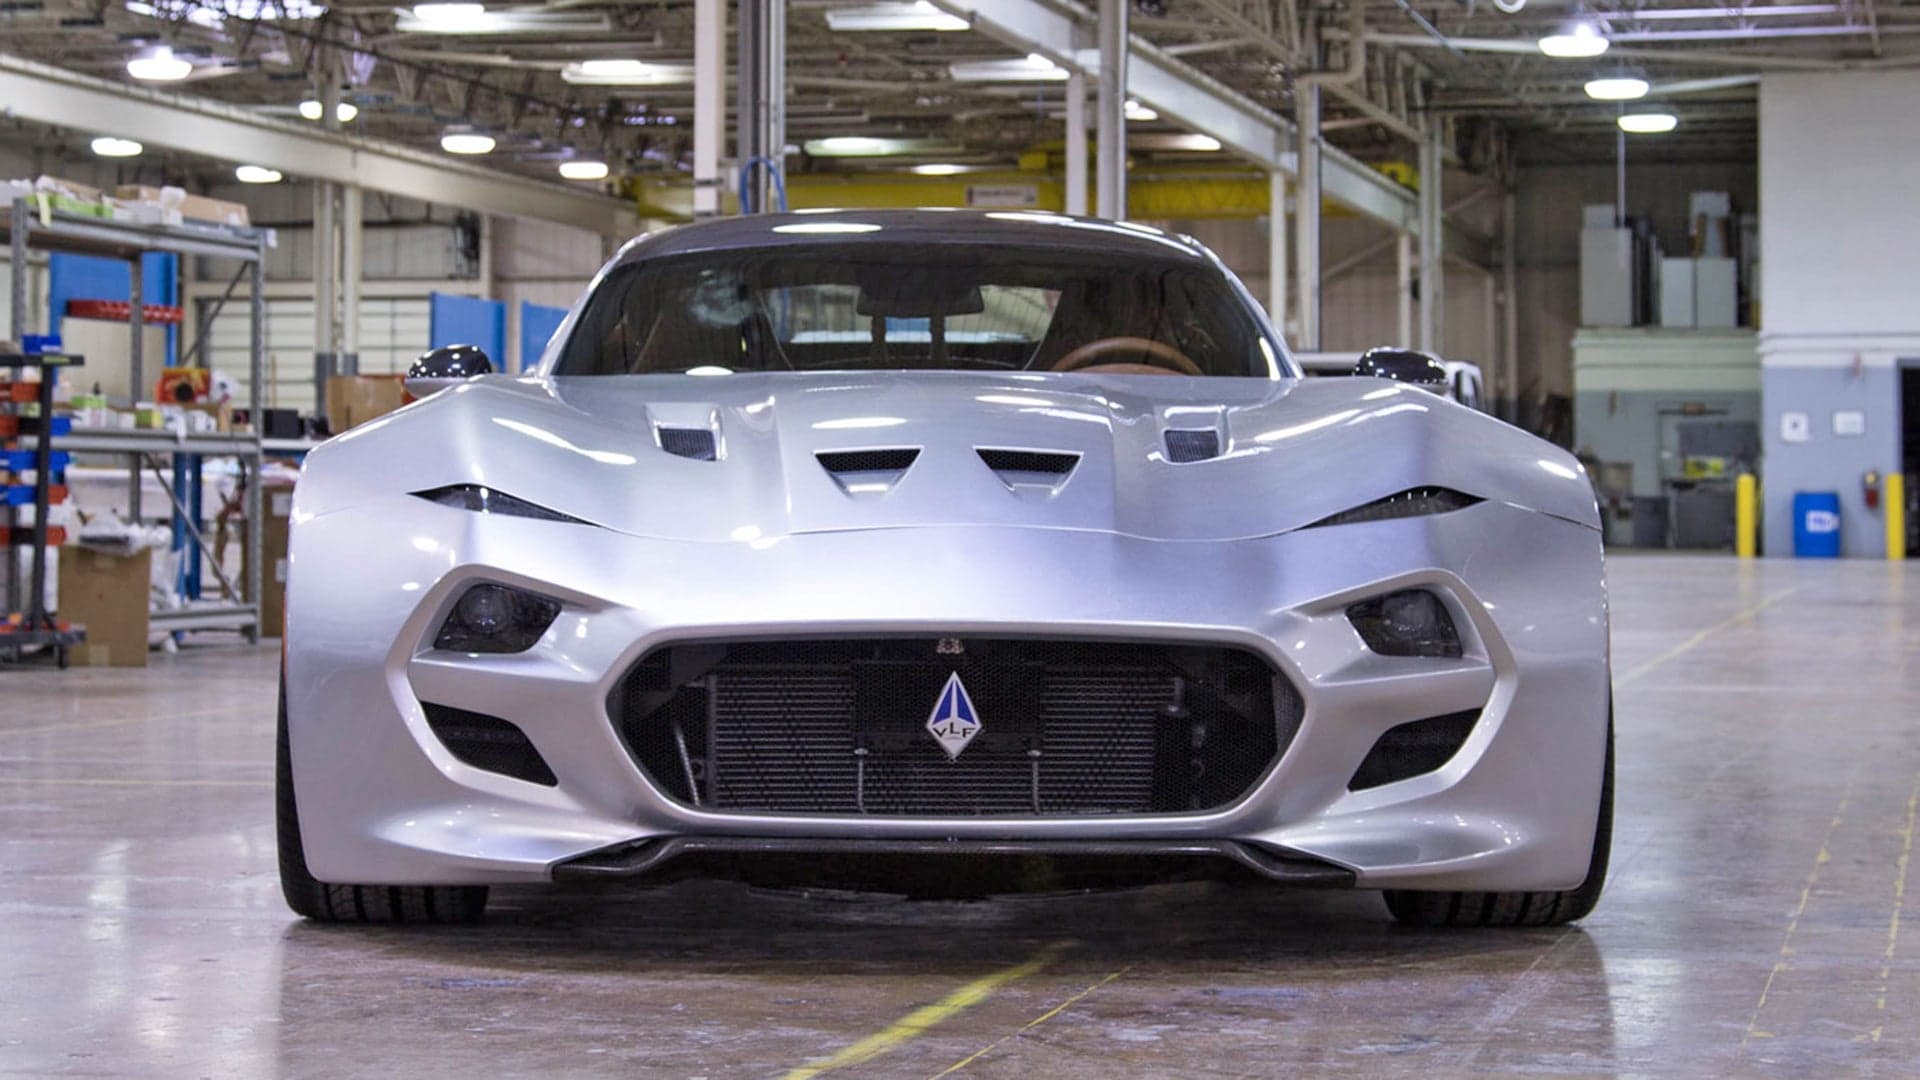 745-HP Dodge Viper-Based VLF Force 1 to Go Roadster Next Month